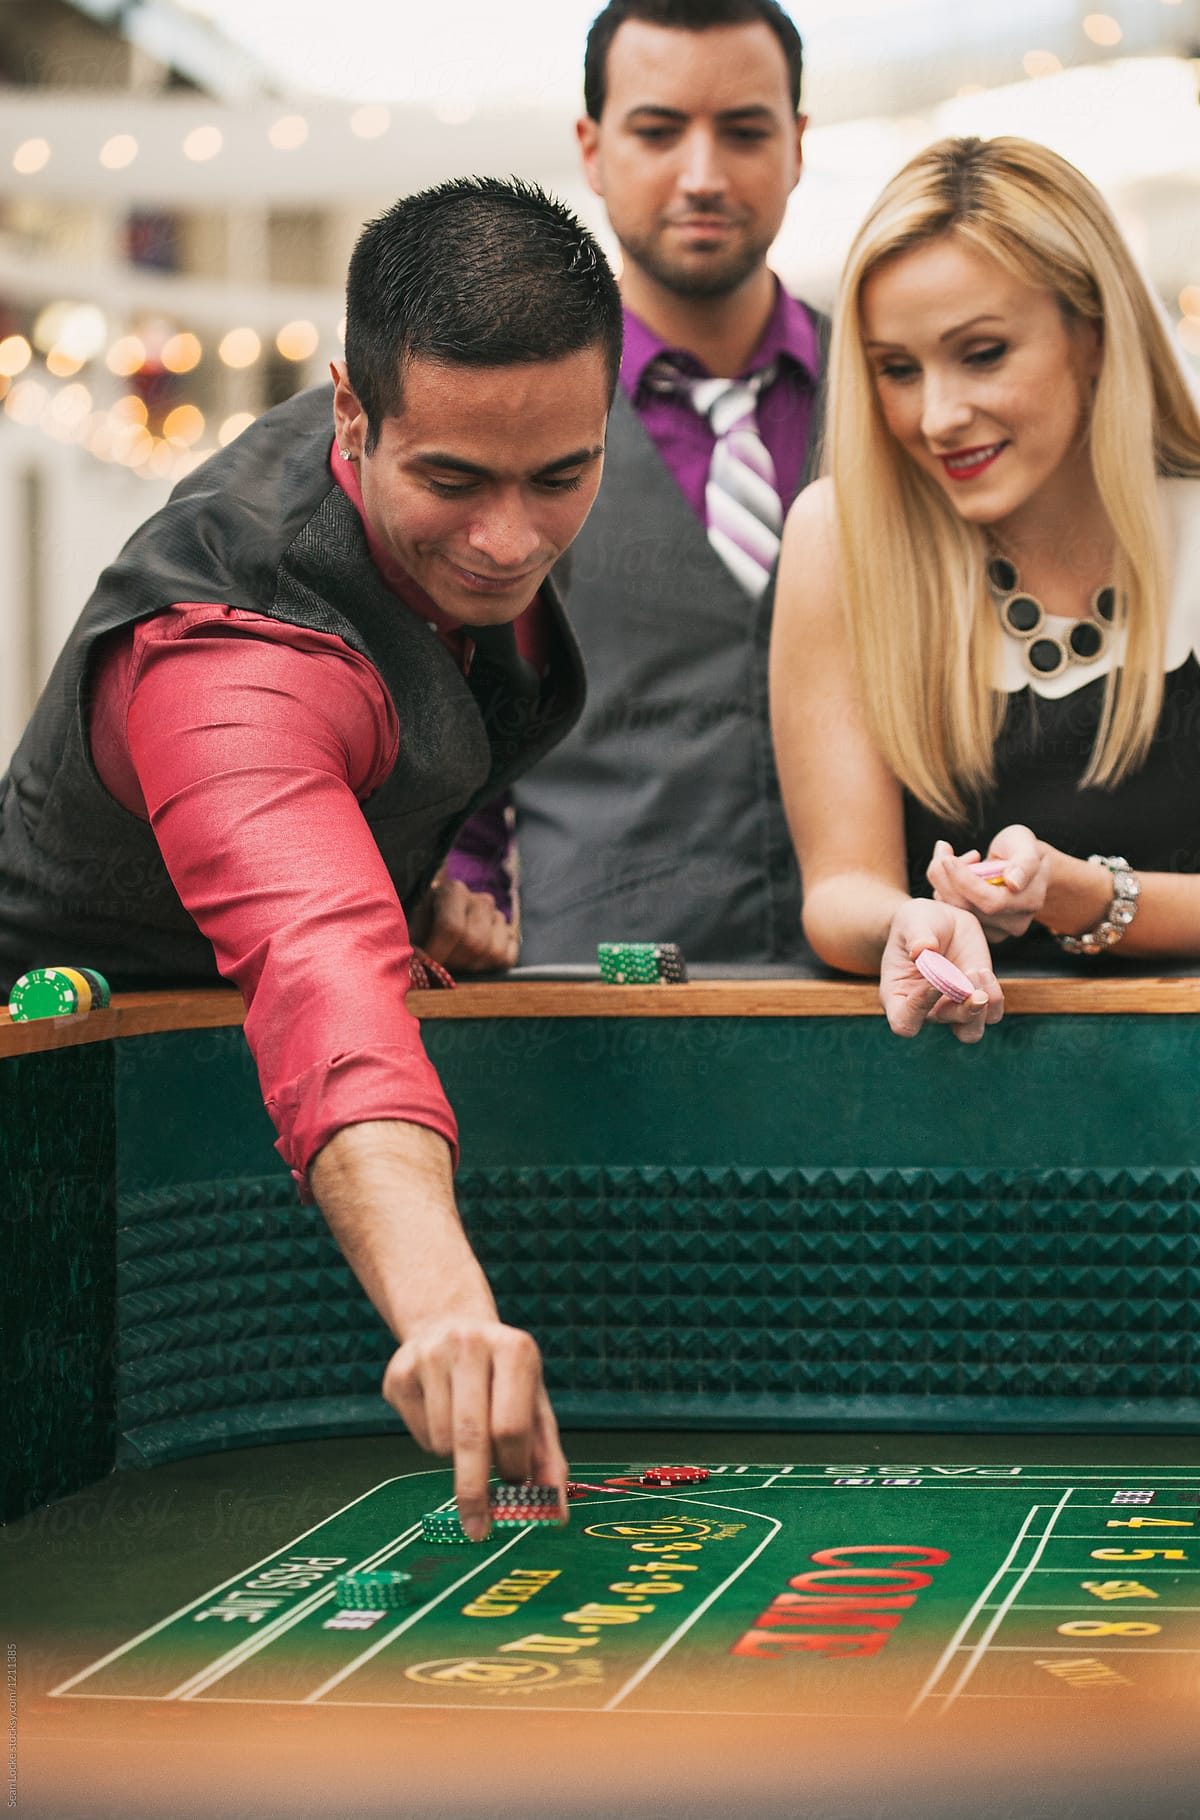 Casino: People Placing Bets On Craps Table